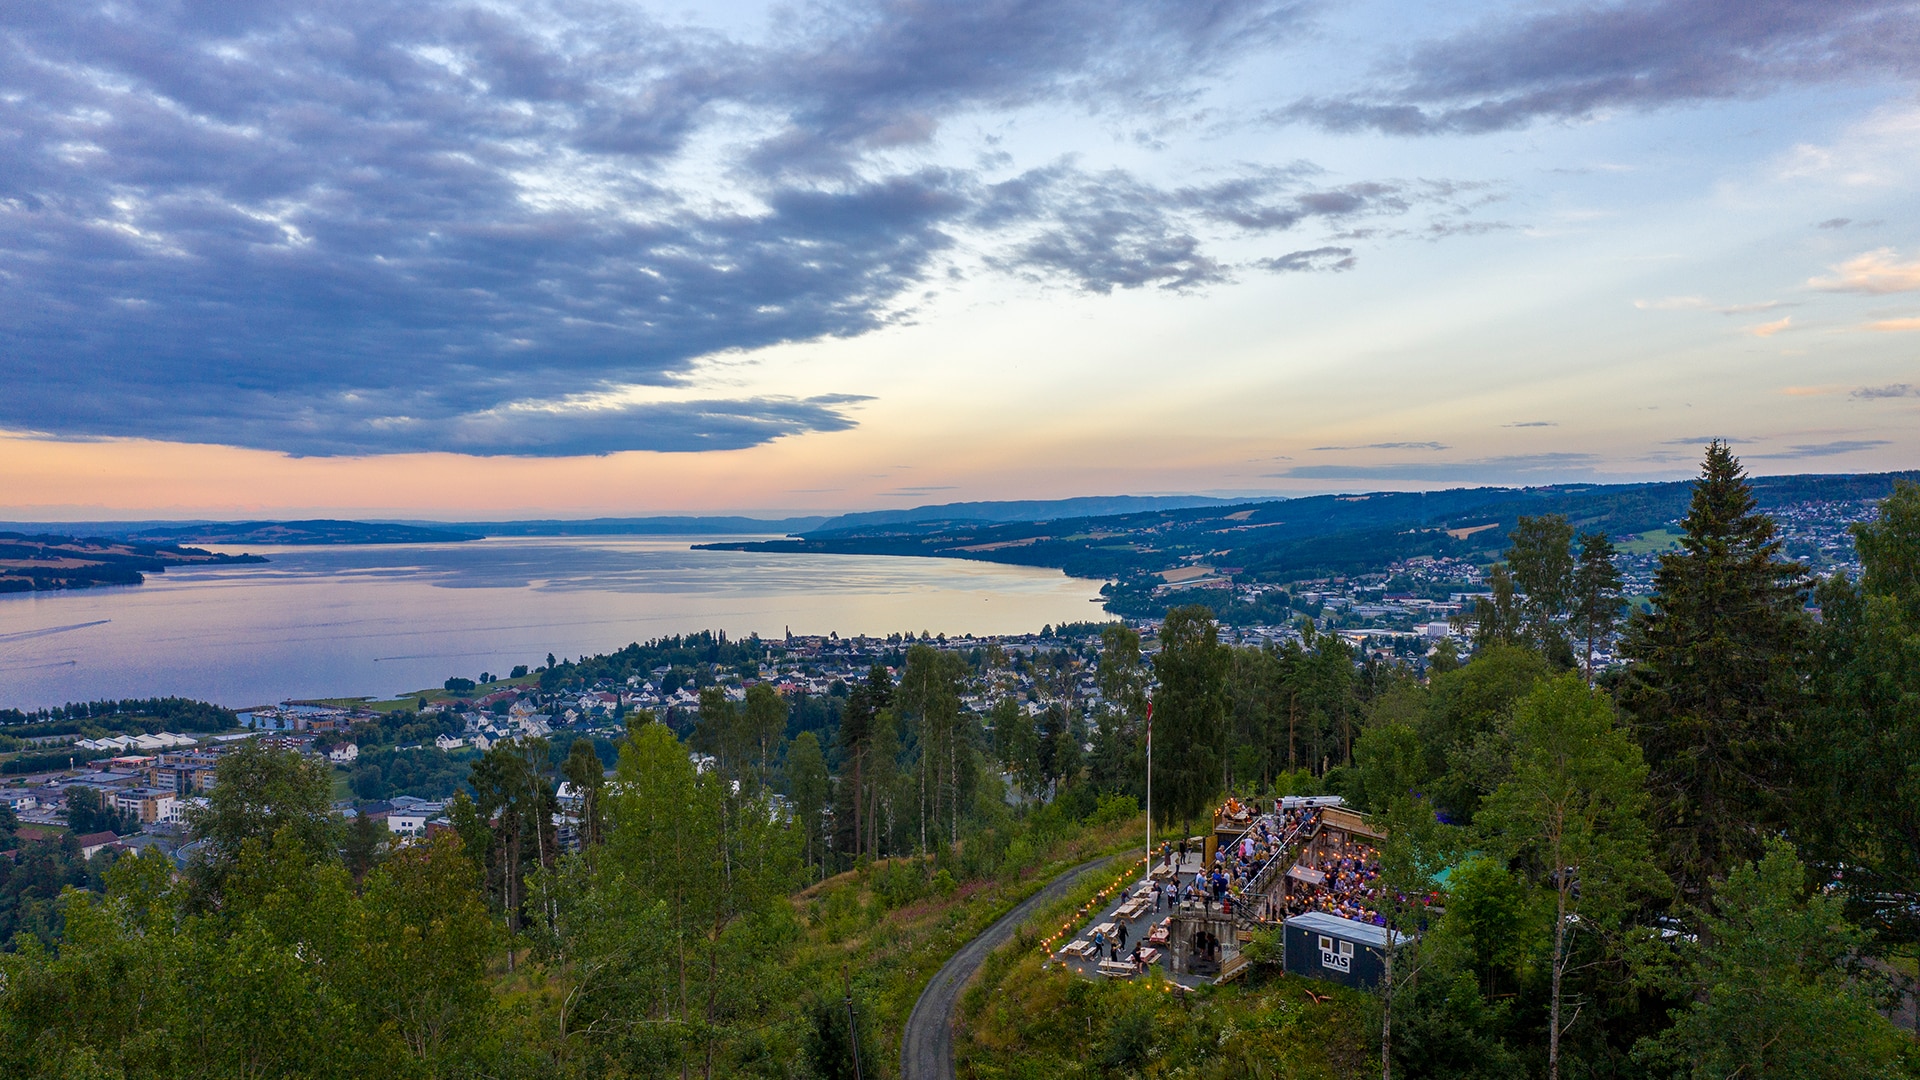 The view of Gjøvik and Mjøsa from Hovedtoppen at sunset in summertime.